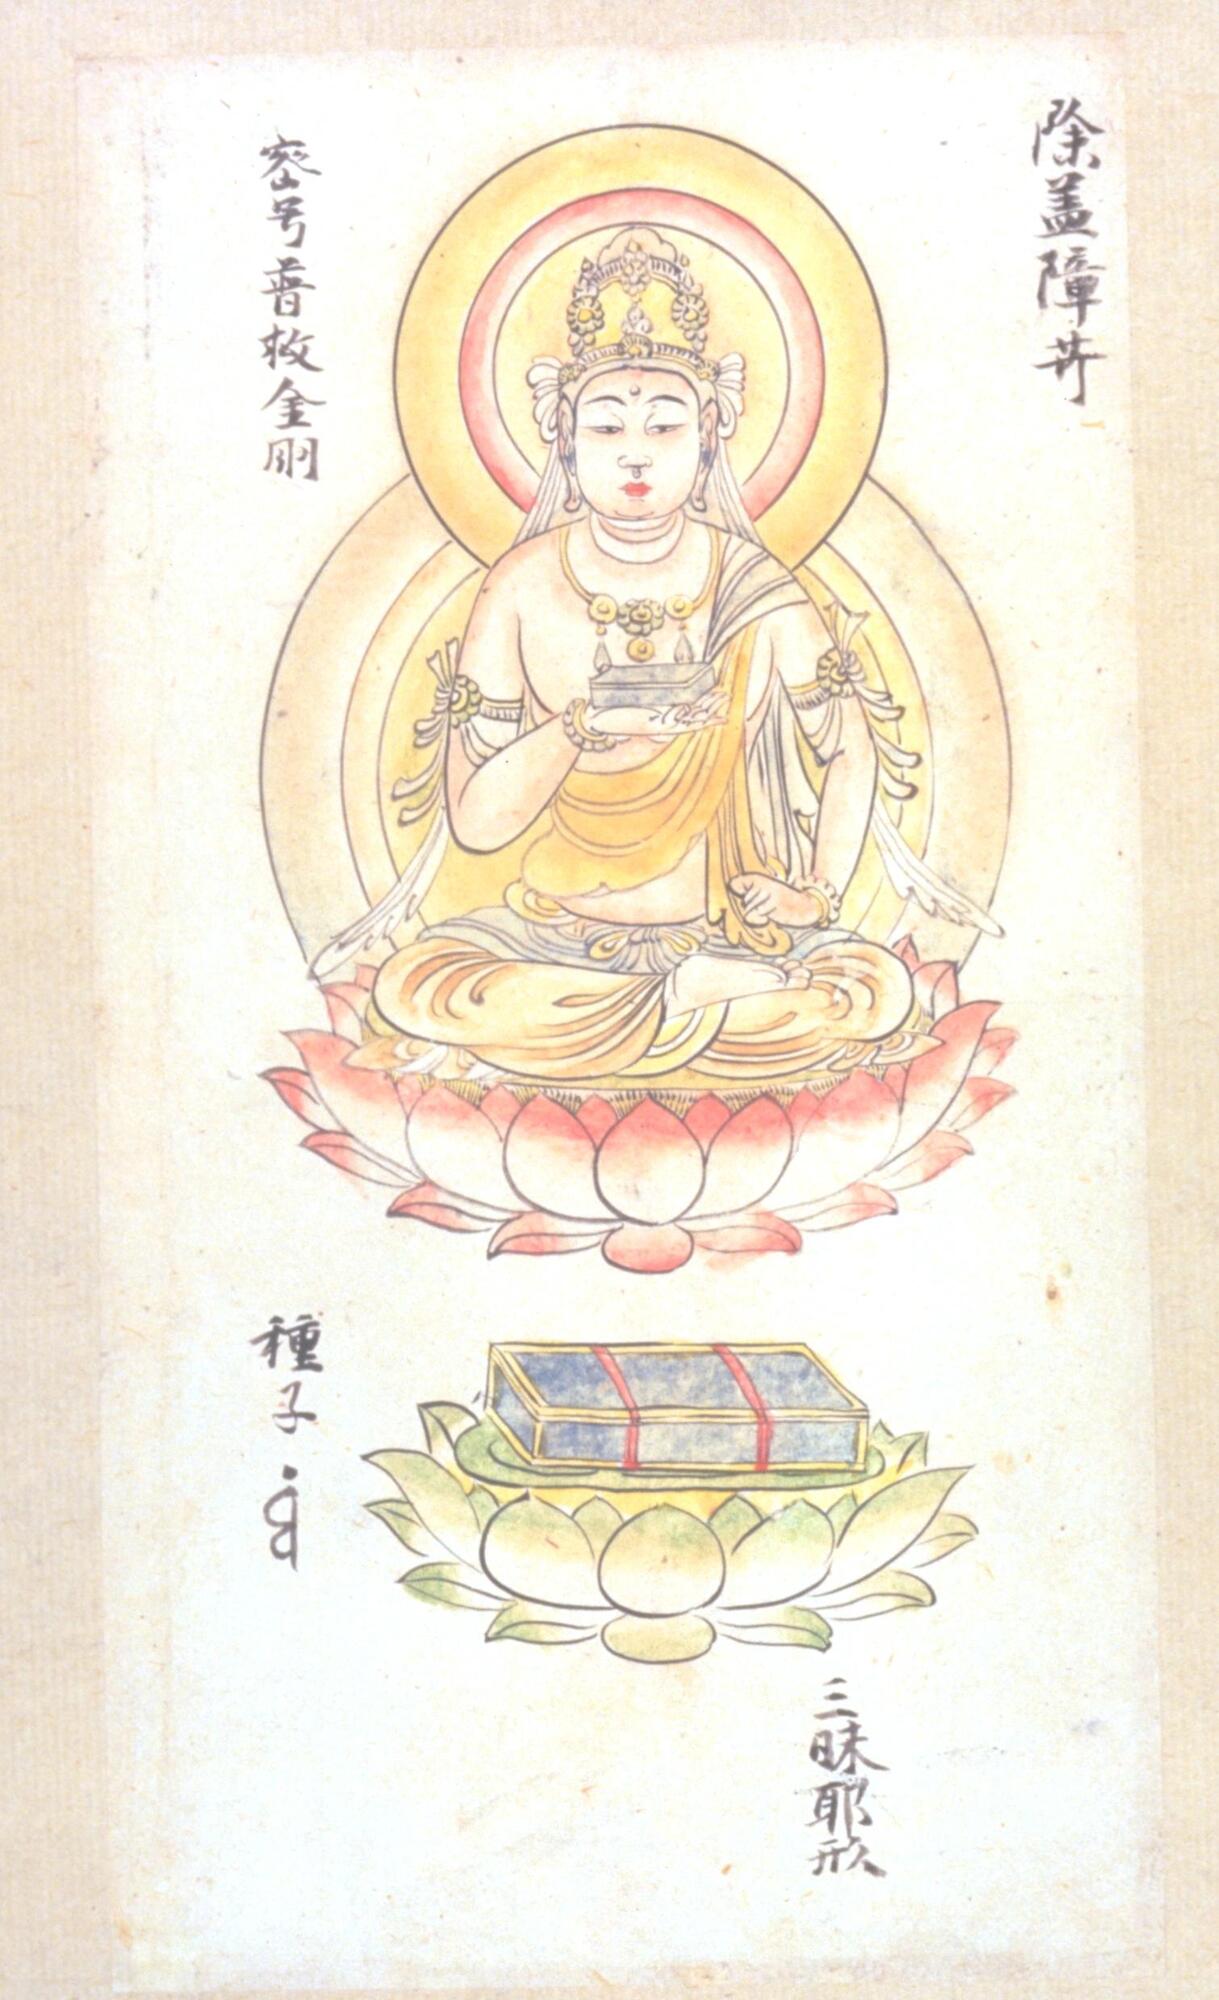 An illustration of the bodhisattva Jokaishō, the divine figure is seated on a lotus blossom venerating a reliquary. The figure sits cross-legged on a red lotus blossom, while beneath the figure is a blue sutra box on a green and yellow lotus. The image is depicted with largely even "iron-wire" lines typical of Heian period Buddhist painting. 